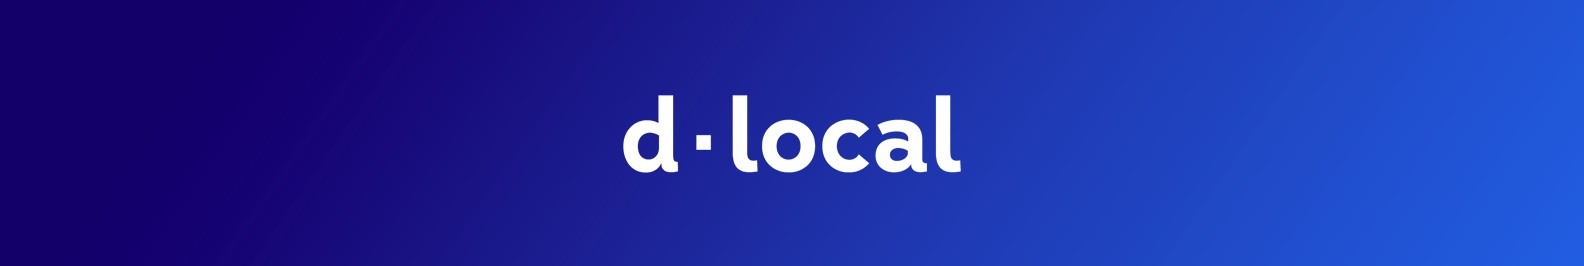 dLocal background